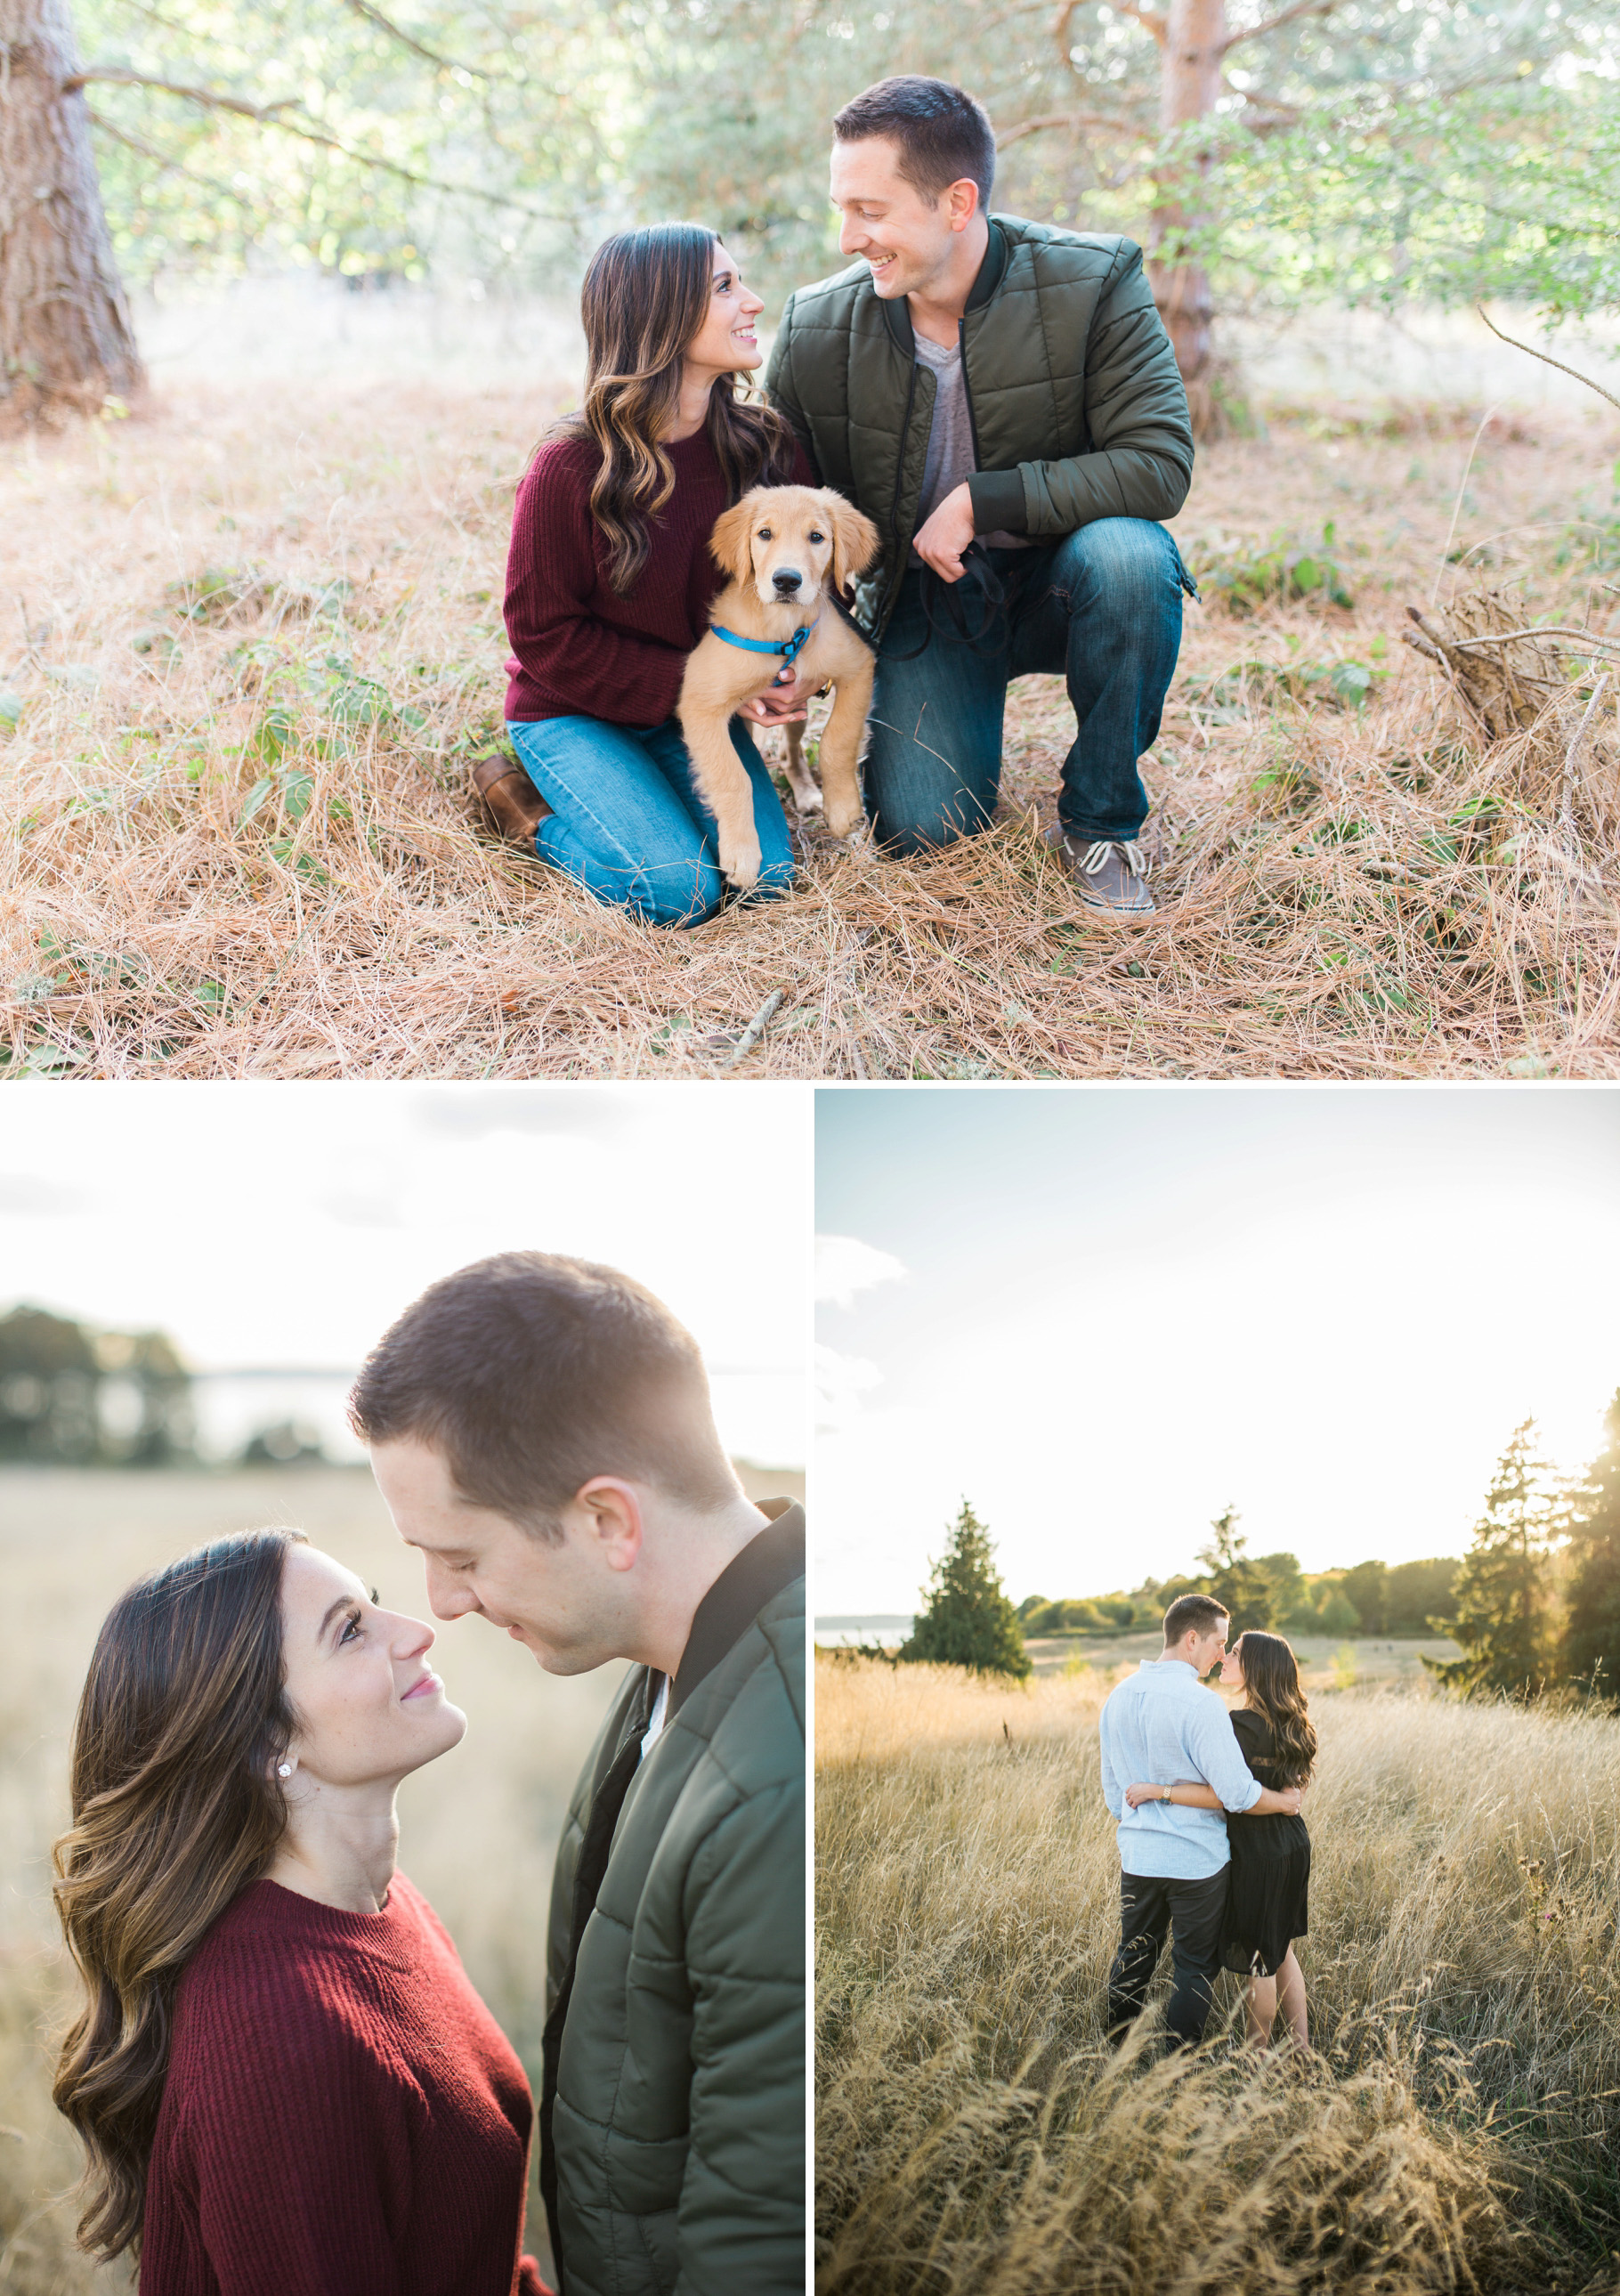 discovery-park-choosing-meaningful-location-engagement-photography-seattle-wedding-photographer-2